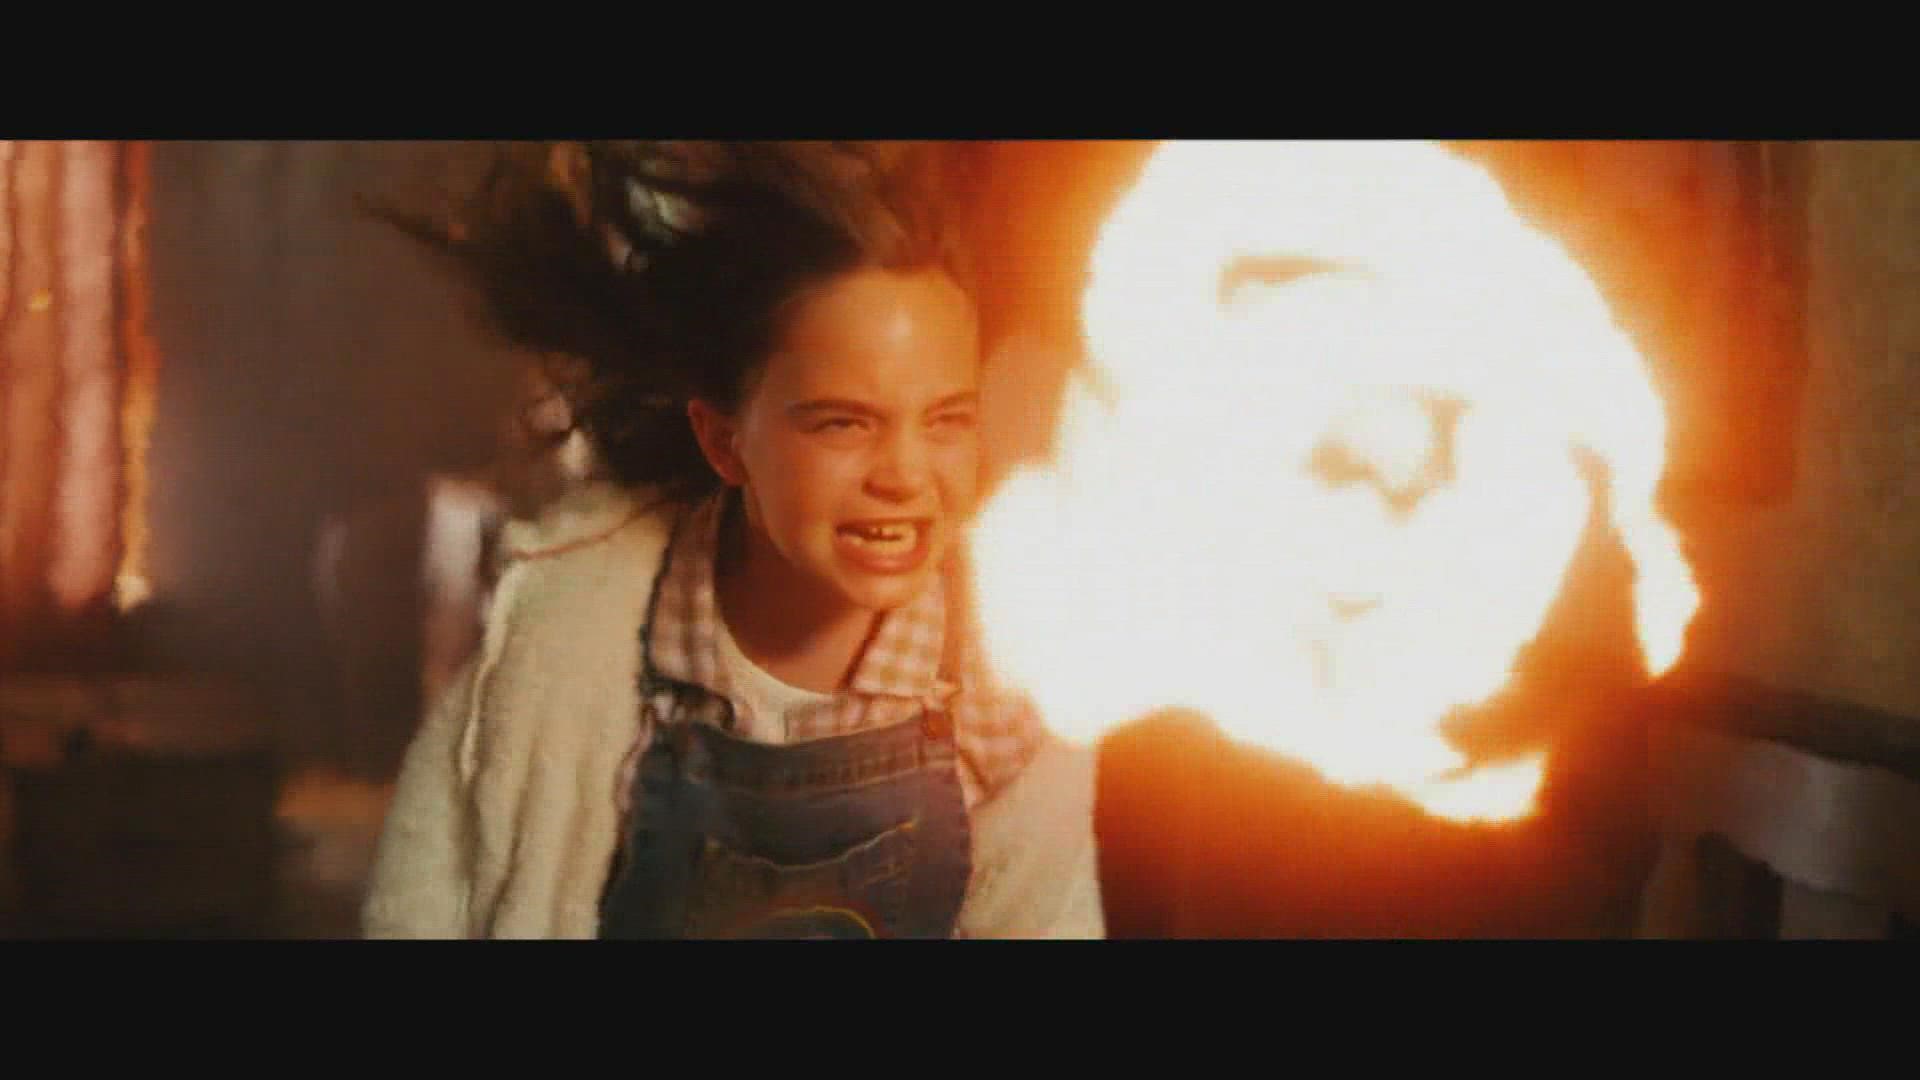 Young Drew Barrymore Lights Up a Guy's Shoes | Firestarter (1984) | Fear -  YouTube